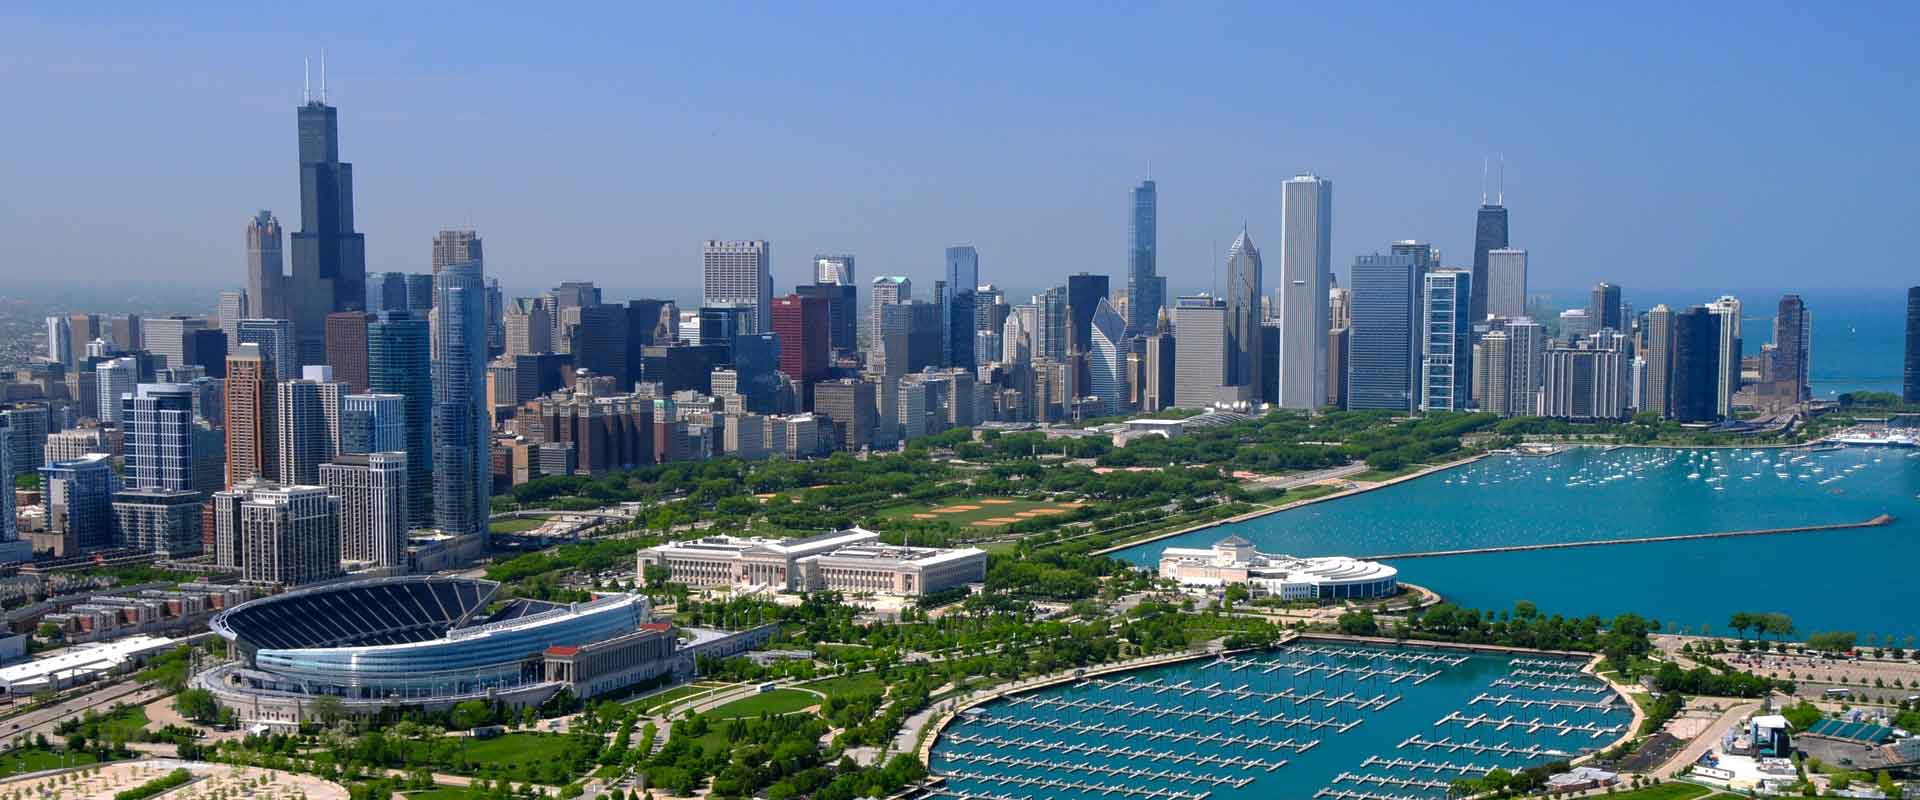 Chicago City Arena Pile Top 10 Largest United States Cities By Population